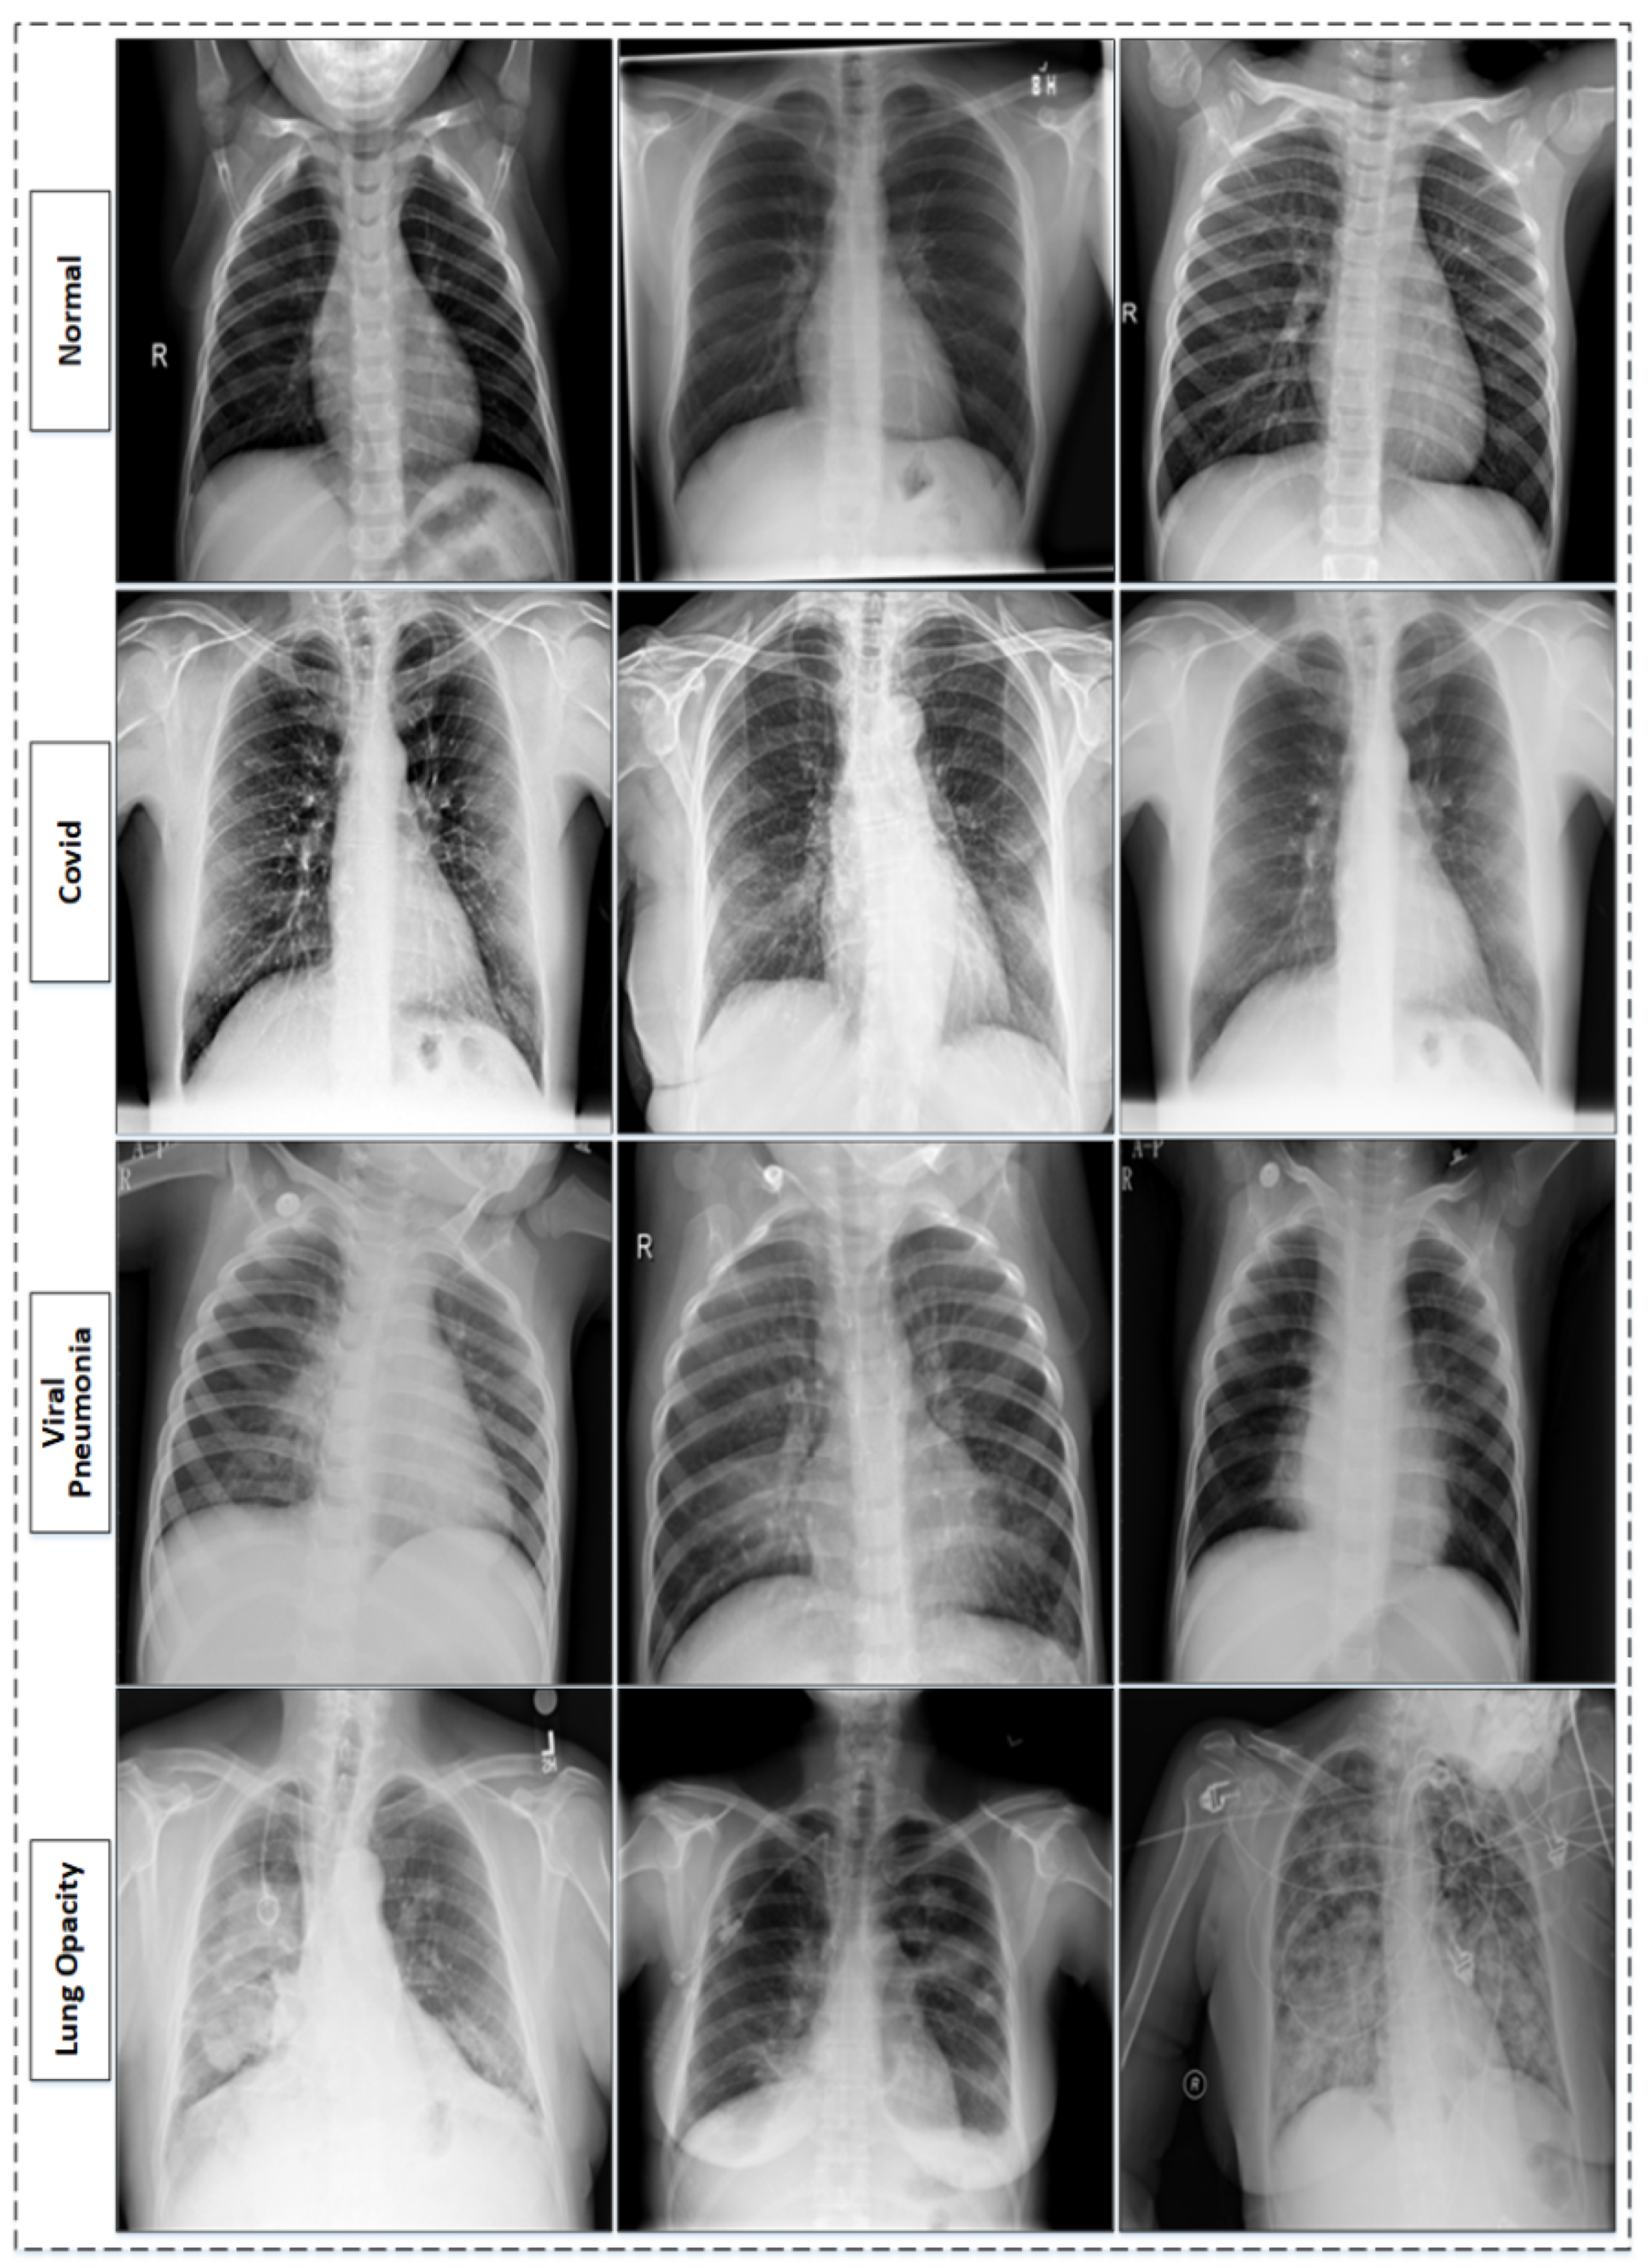 Sensors Free Full-Text Chest X-ray Classification For The, 52% OFF